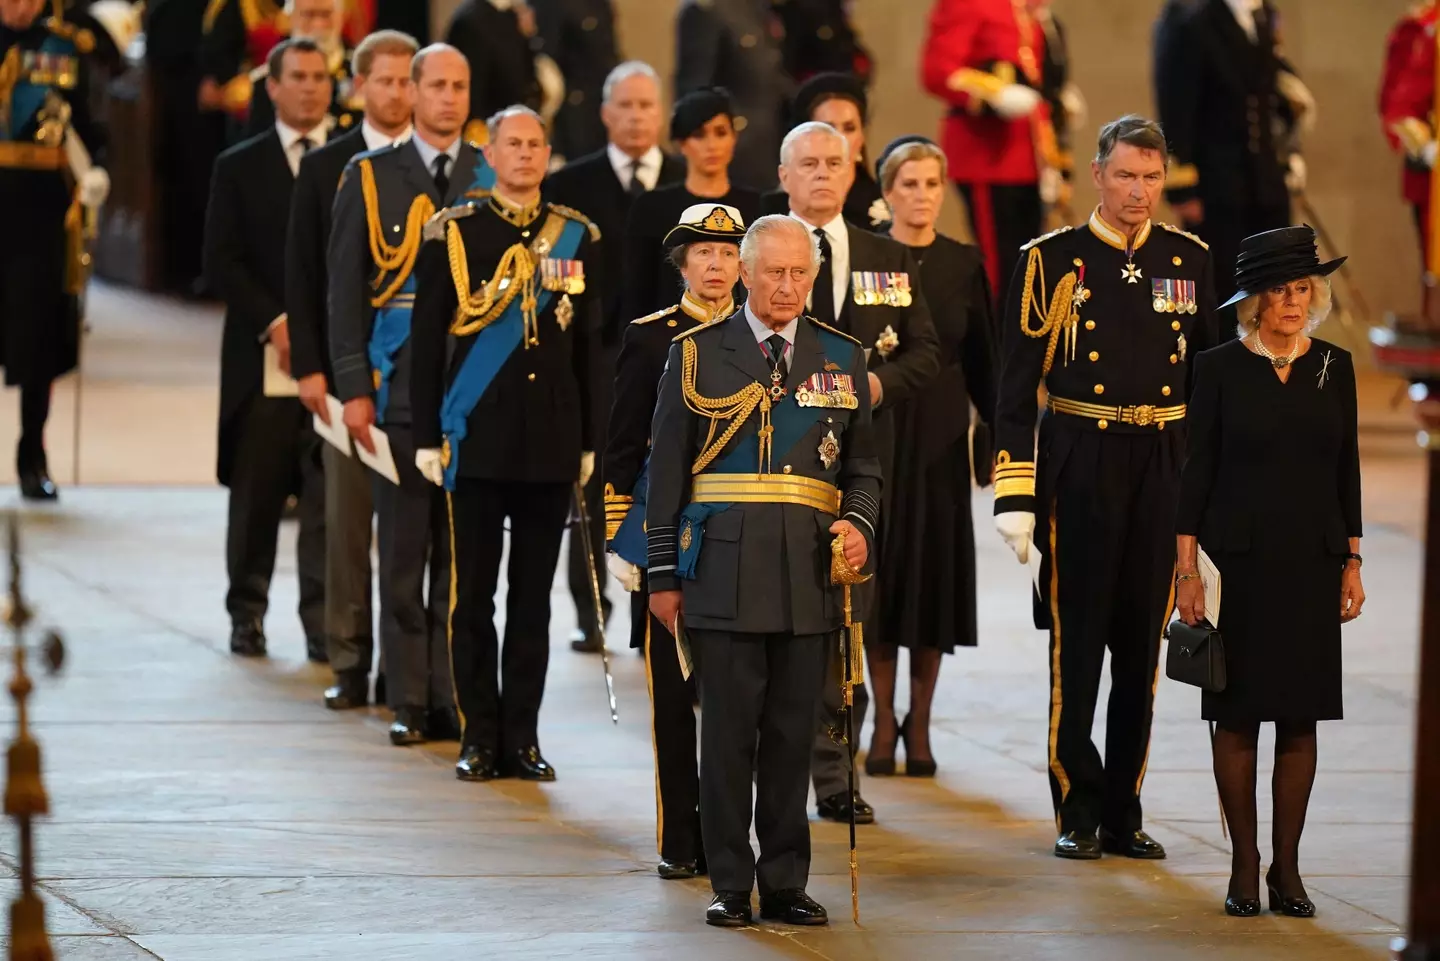 The Queen's coffin was taken to Westminster Hall, London.